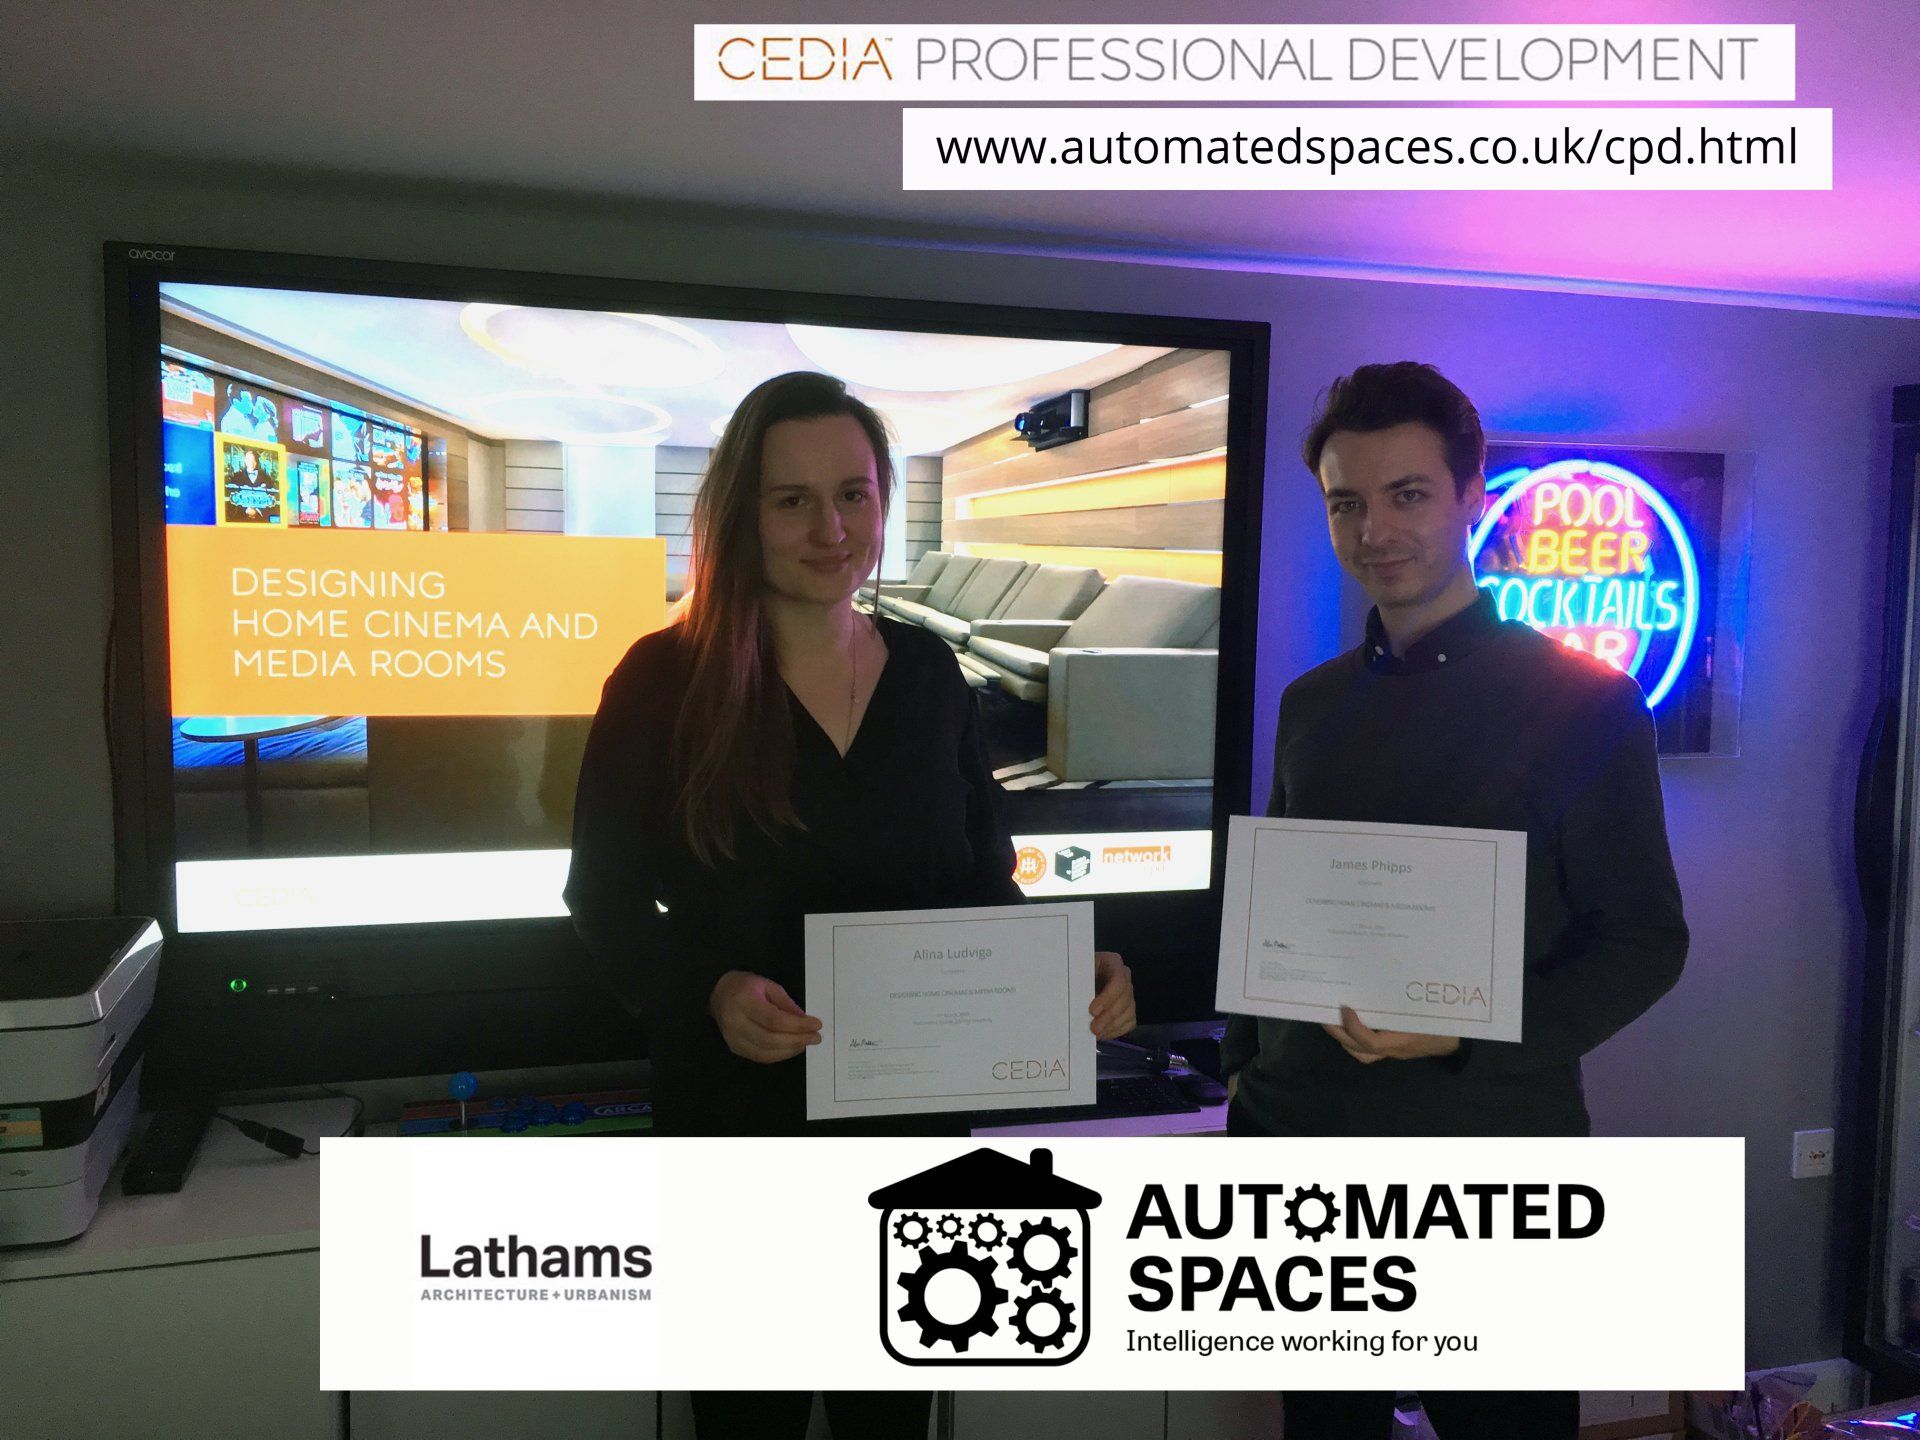 Photograph of Latham Architects attending a CPD at Automated Spaces